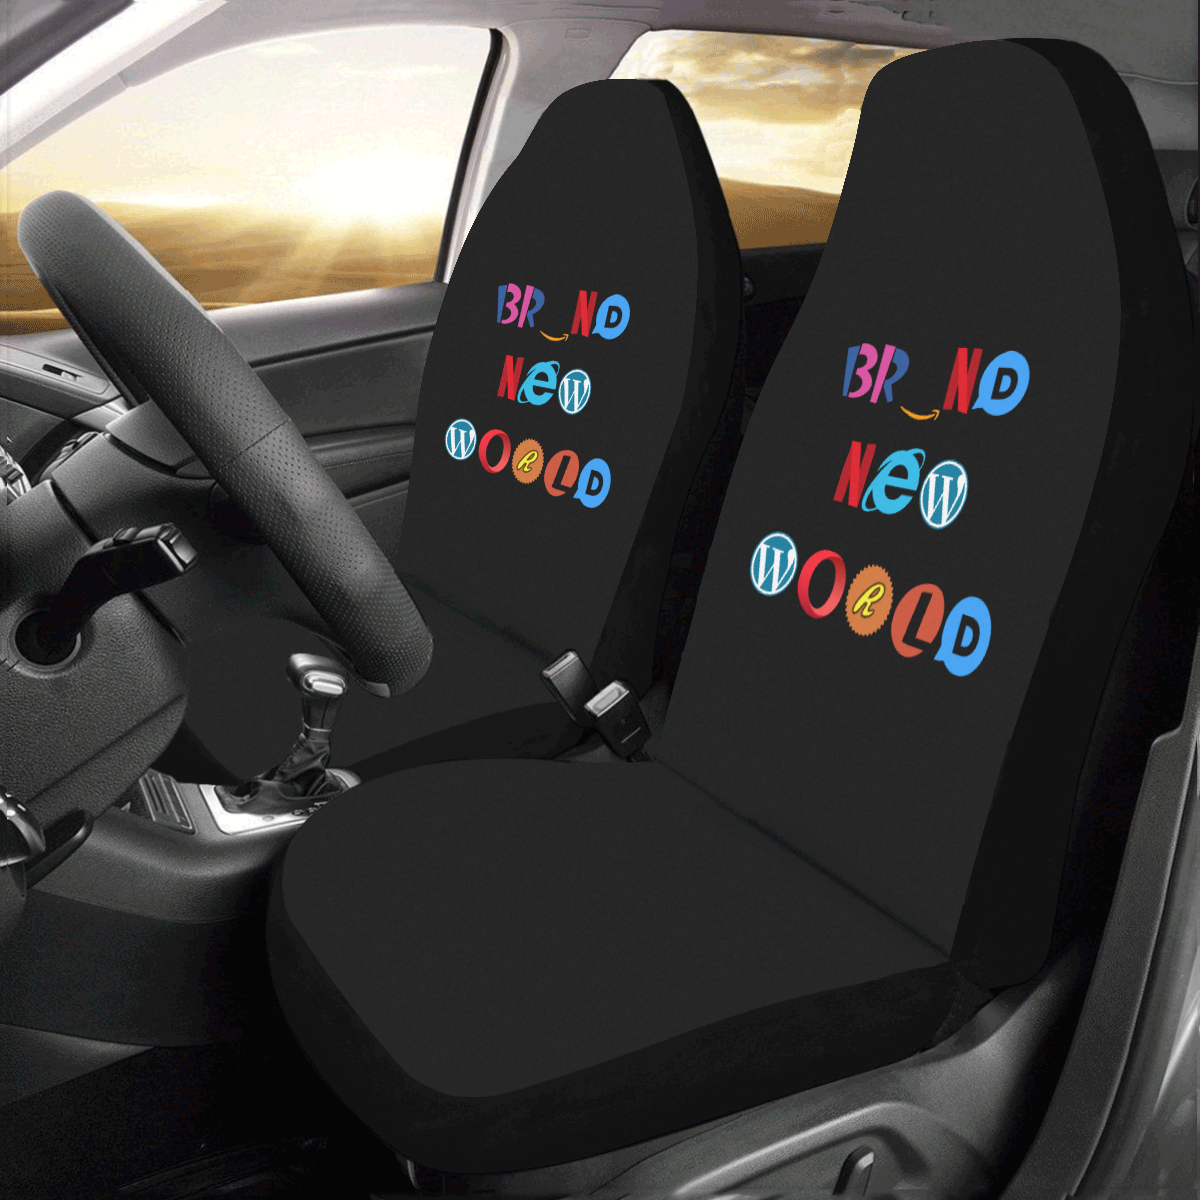 BNW V11 Car Seat Covers (Set of 2)